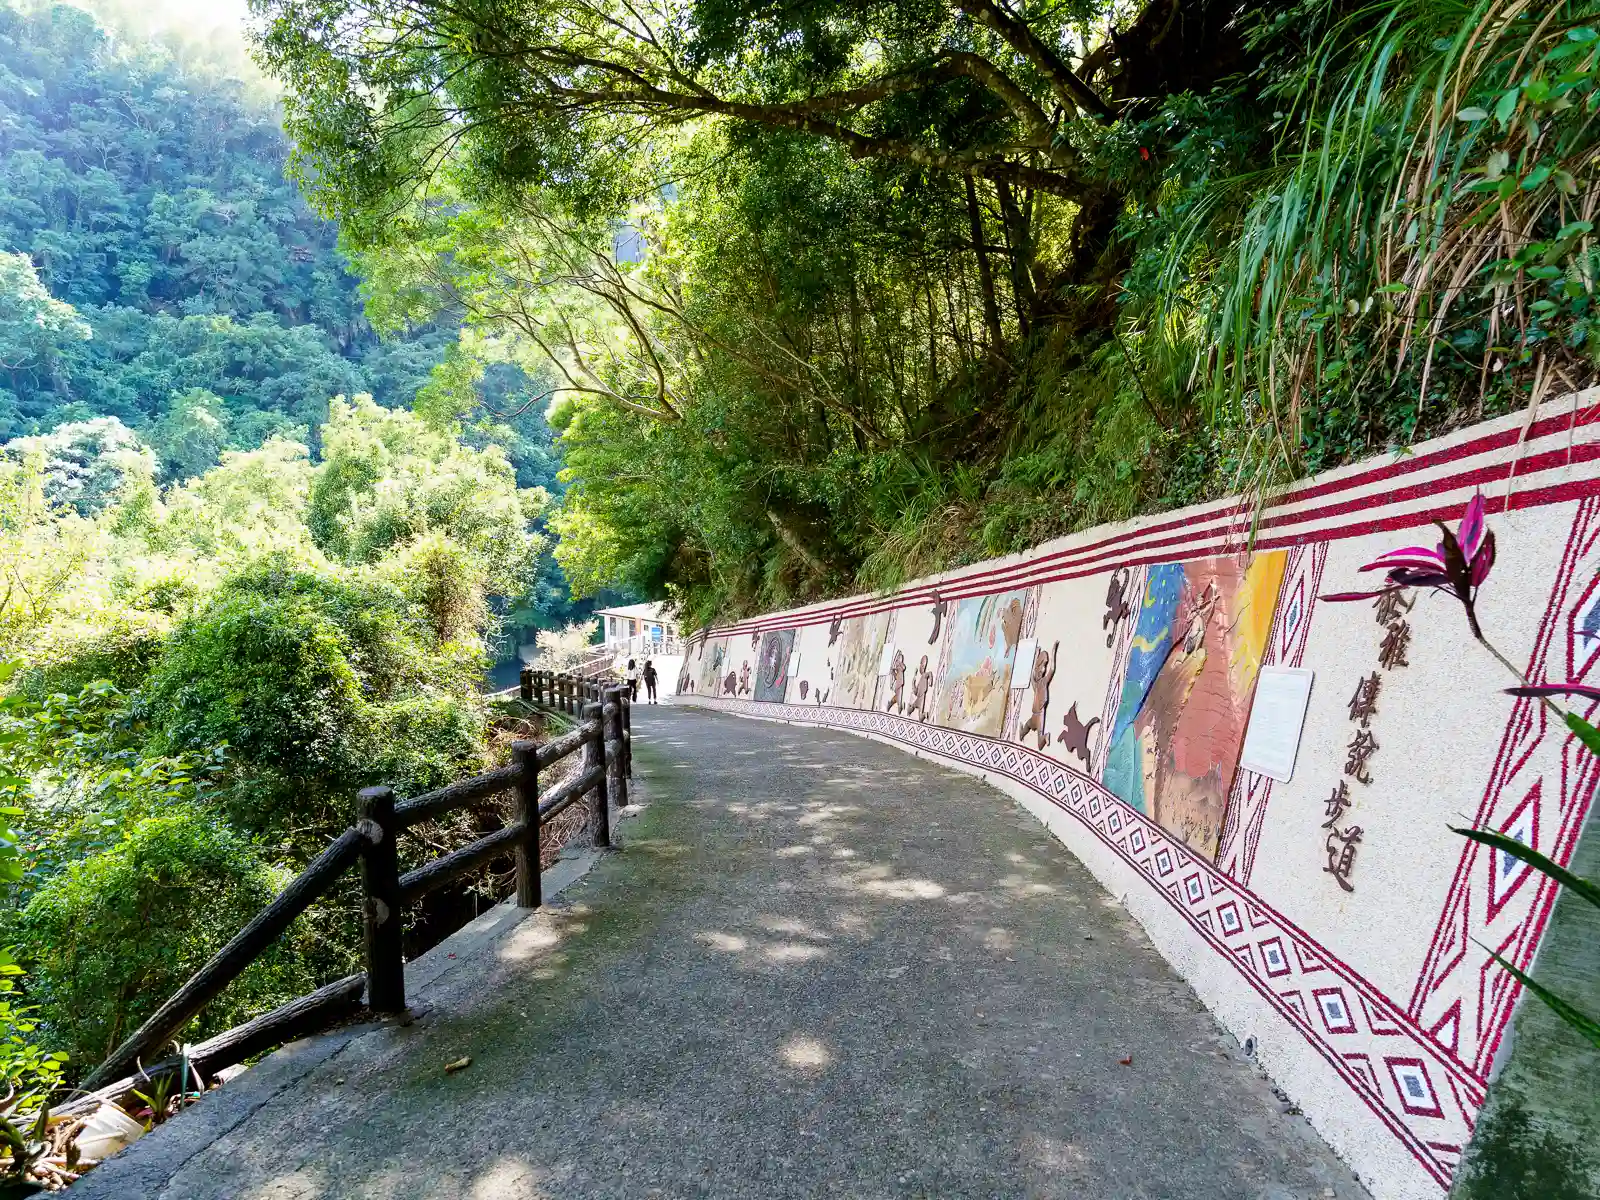 One side of a path leading down a mountainside is decorated with colorful stone reliefs.